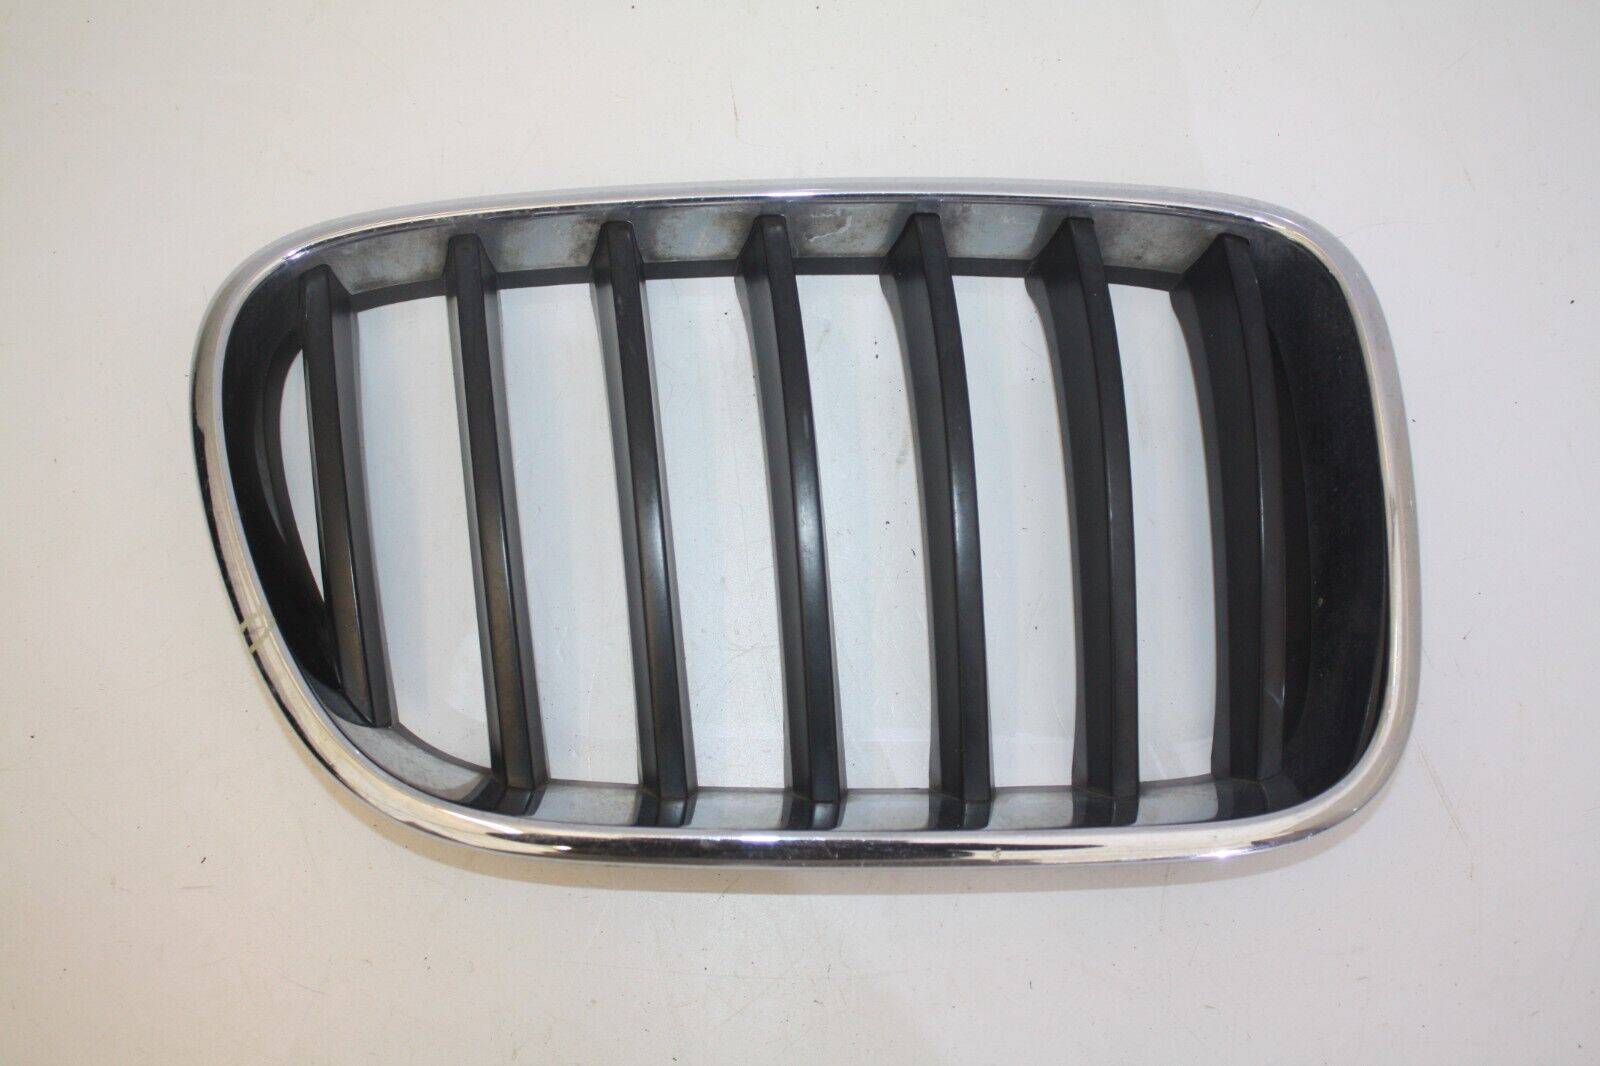 BMW-X3-F25-Front-Bumper-Right-Kidney-Grill-2010-TO-2014-51117210726-Genuine-176234455095